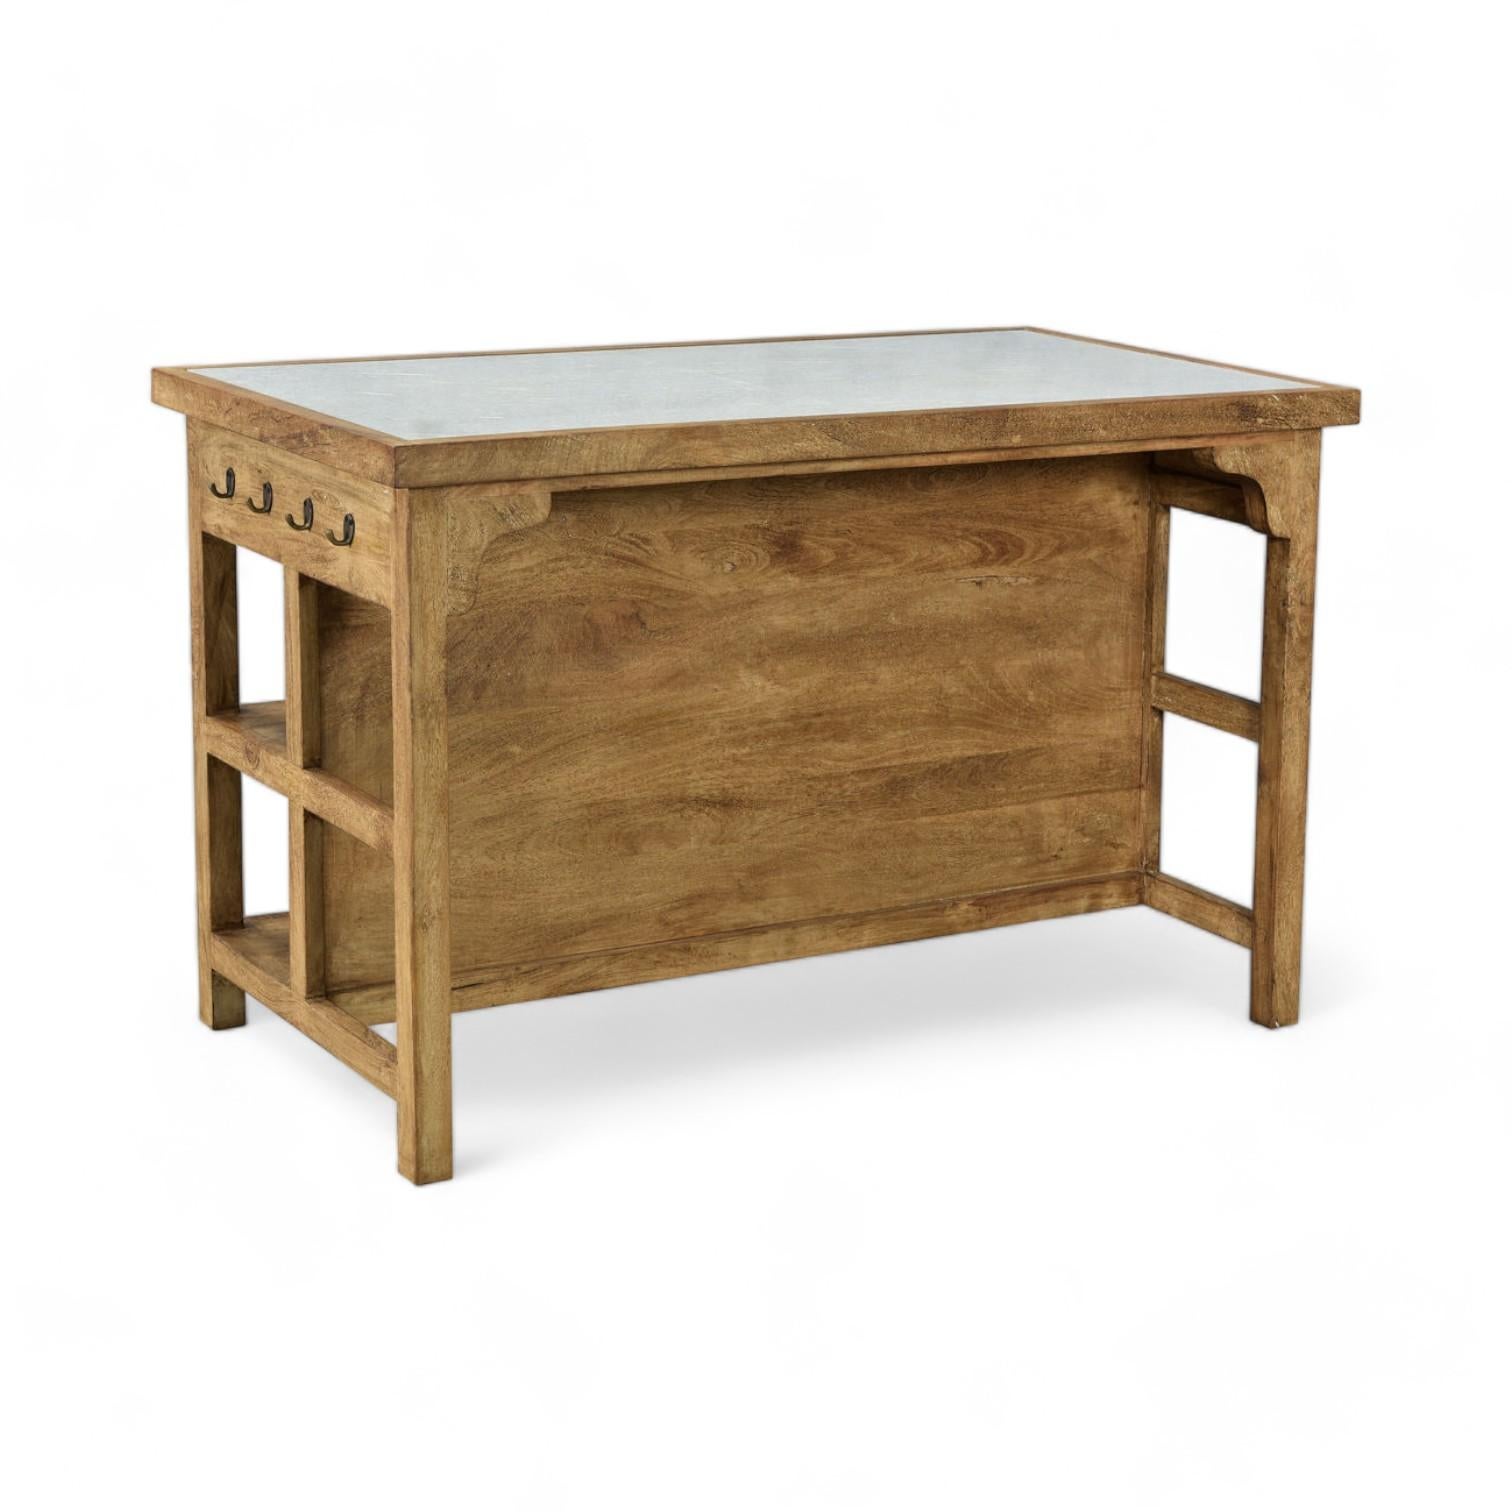 North American Stone Top Wooden Kitchen Island with Storage / Counter / Dry Bar 